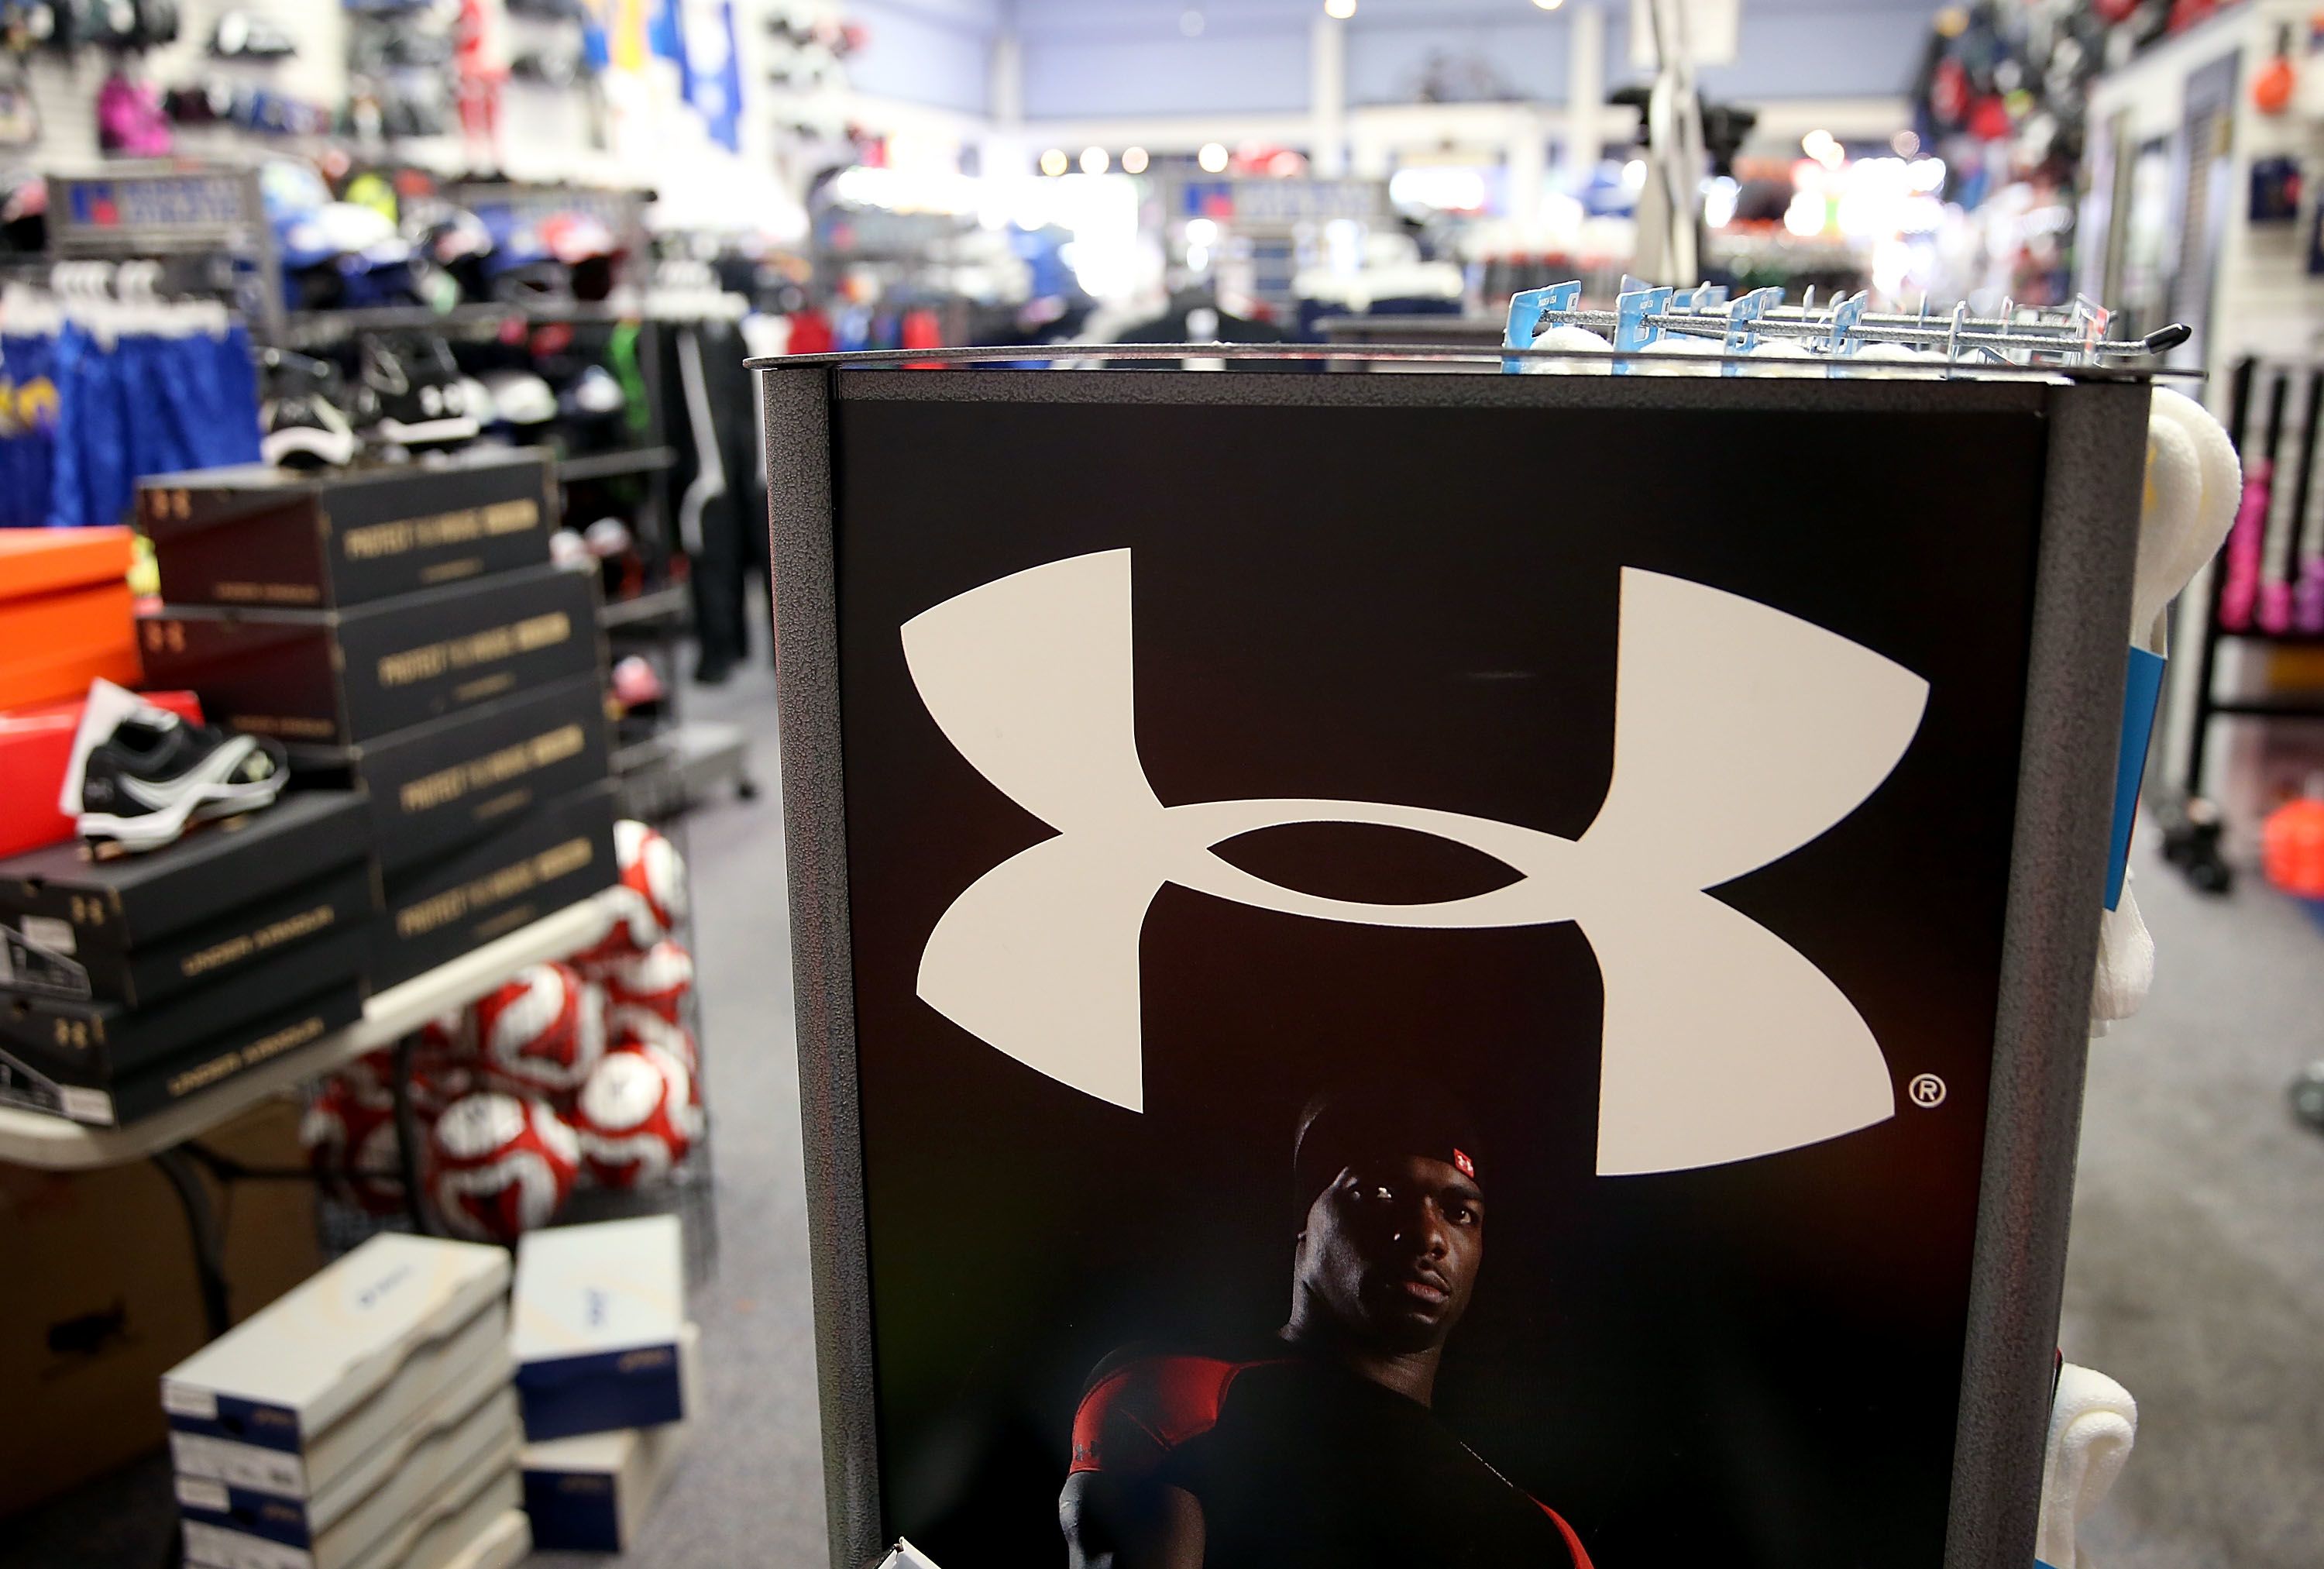 Under Armour tells Journal report on culture was 'tough read' CNN Business